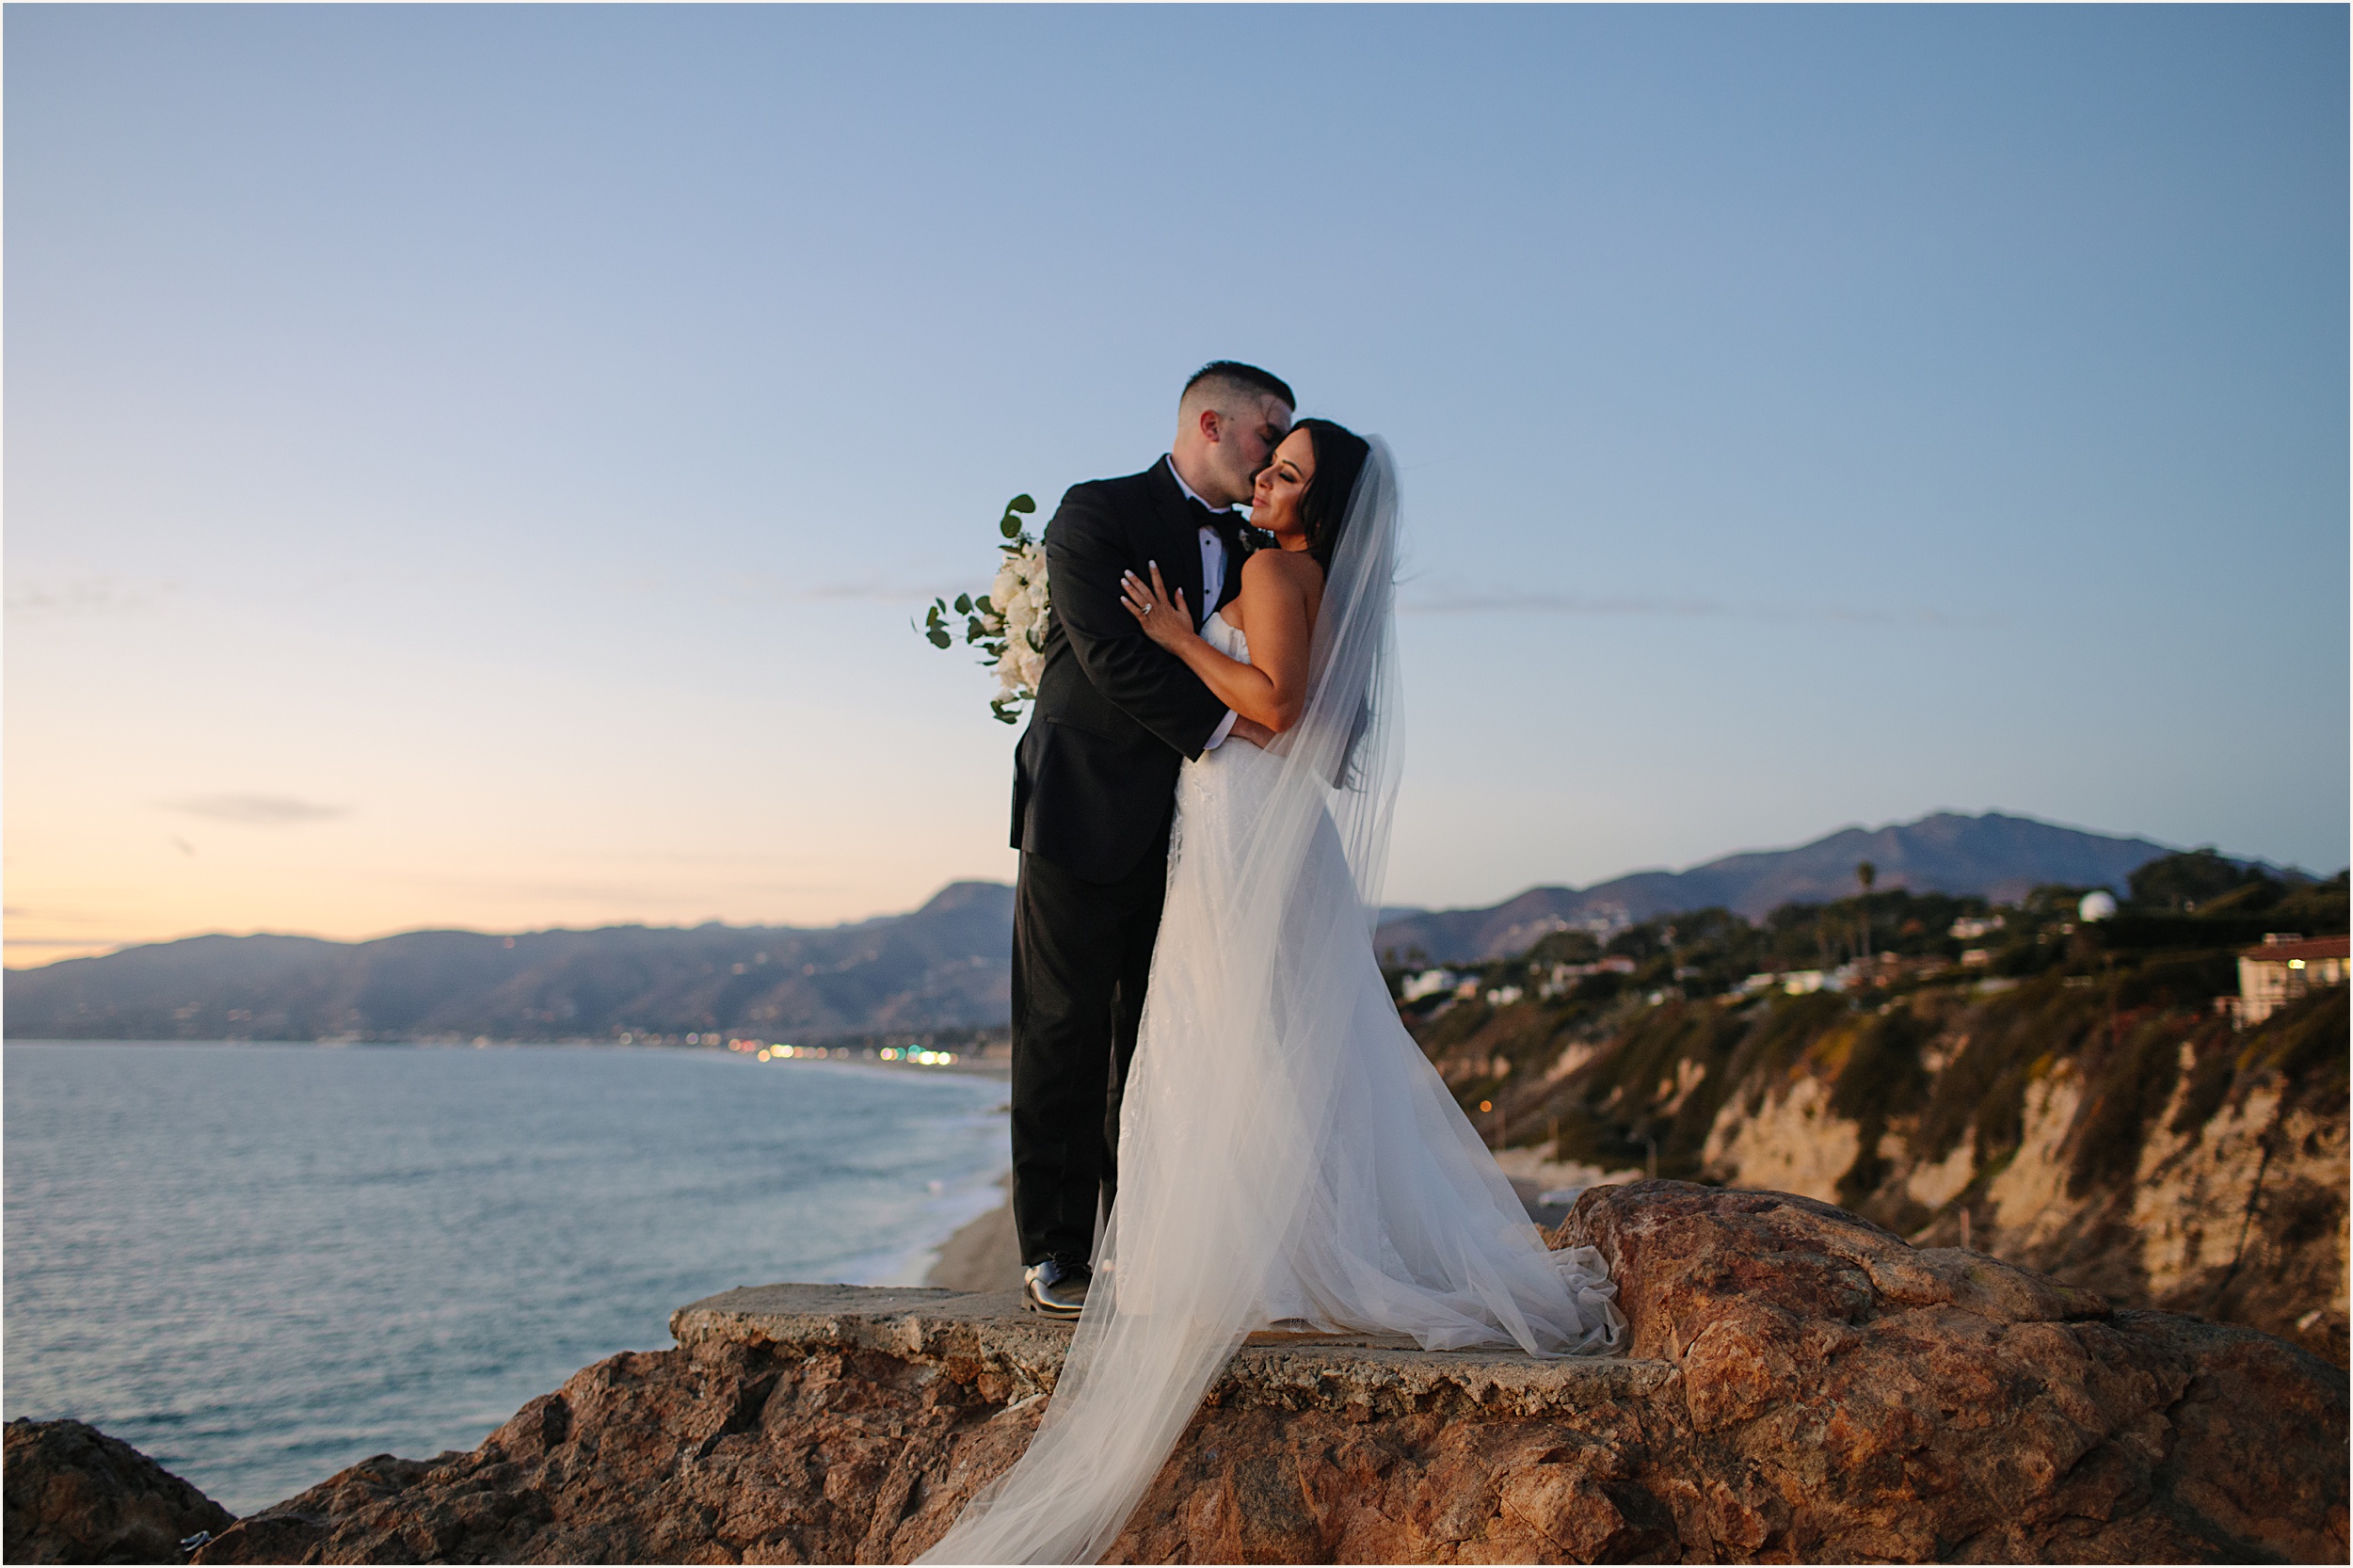 Photo of bride and groom embracing one another on cliffside view during sunset for their Malibu beach elopement 